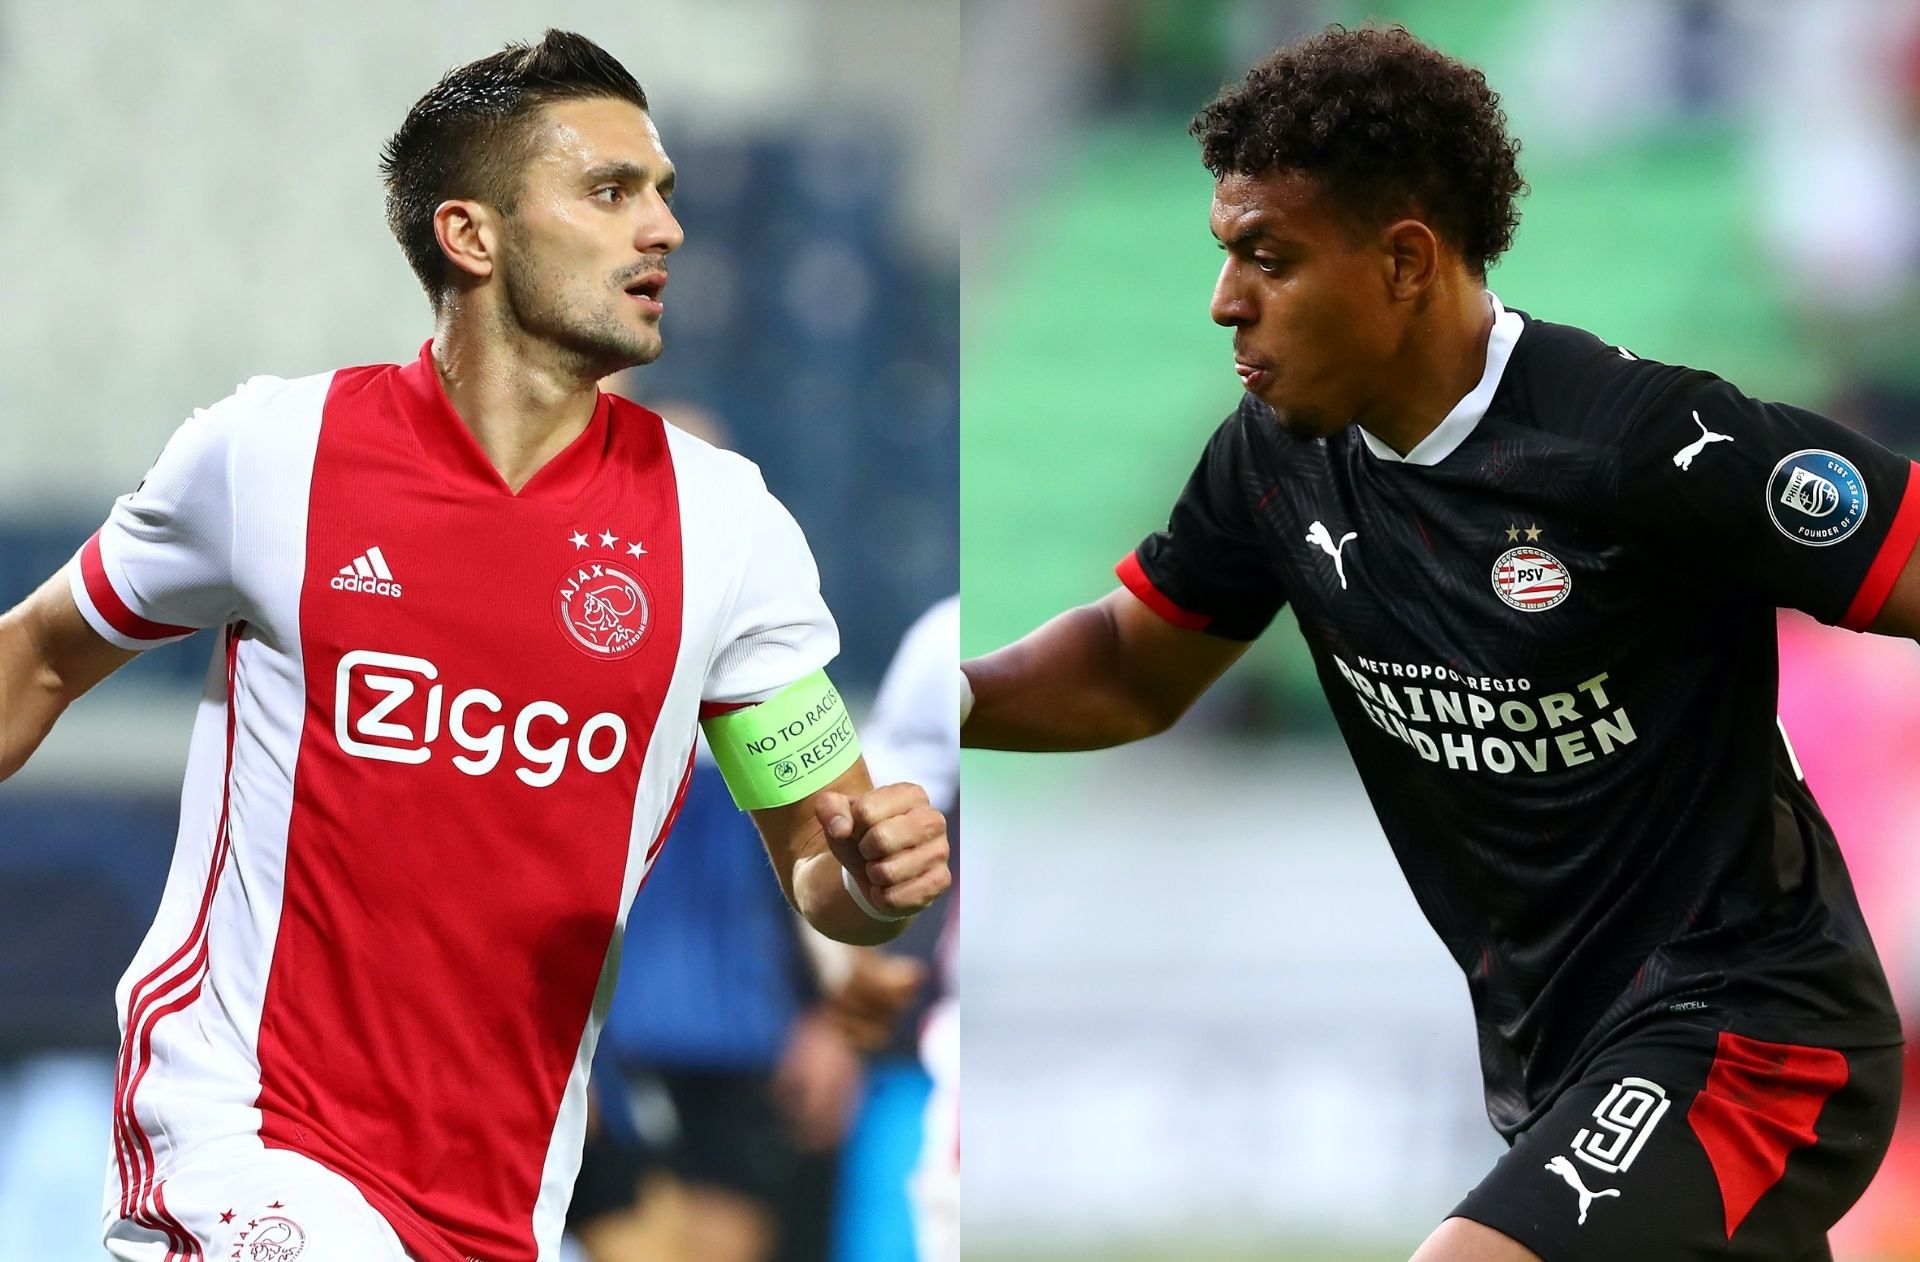 Ajax vs PSV Eindhoven: Preview, Betting Tips, Stats & Prediction